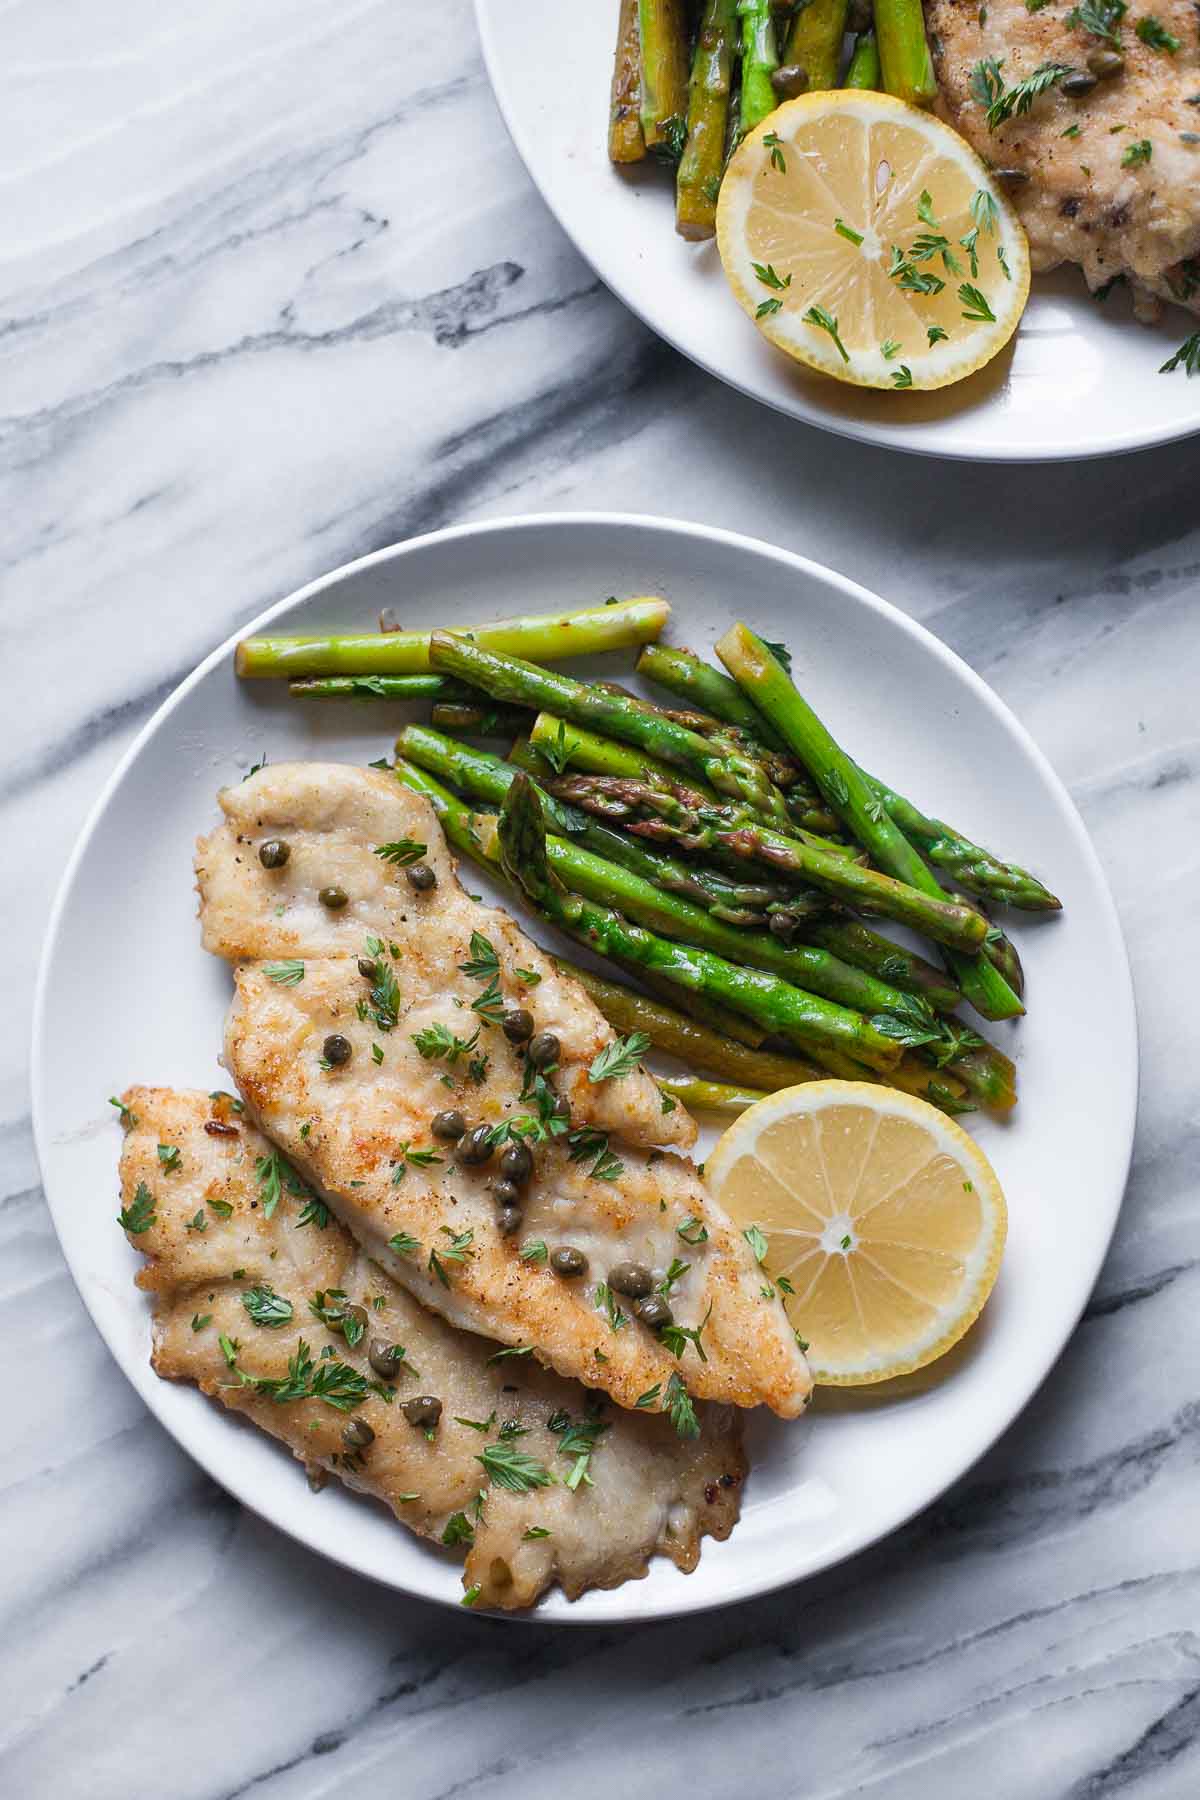 Top 16 Paleo Recipes of 2016: Paleo Chicken Piccata with Asparagus